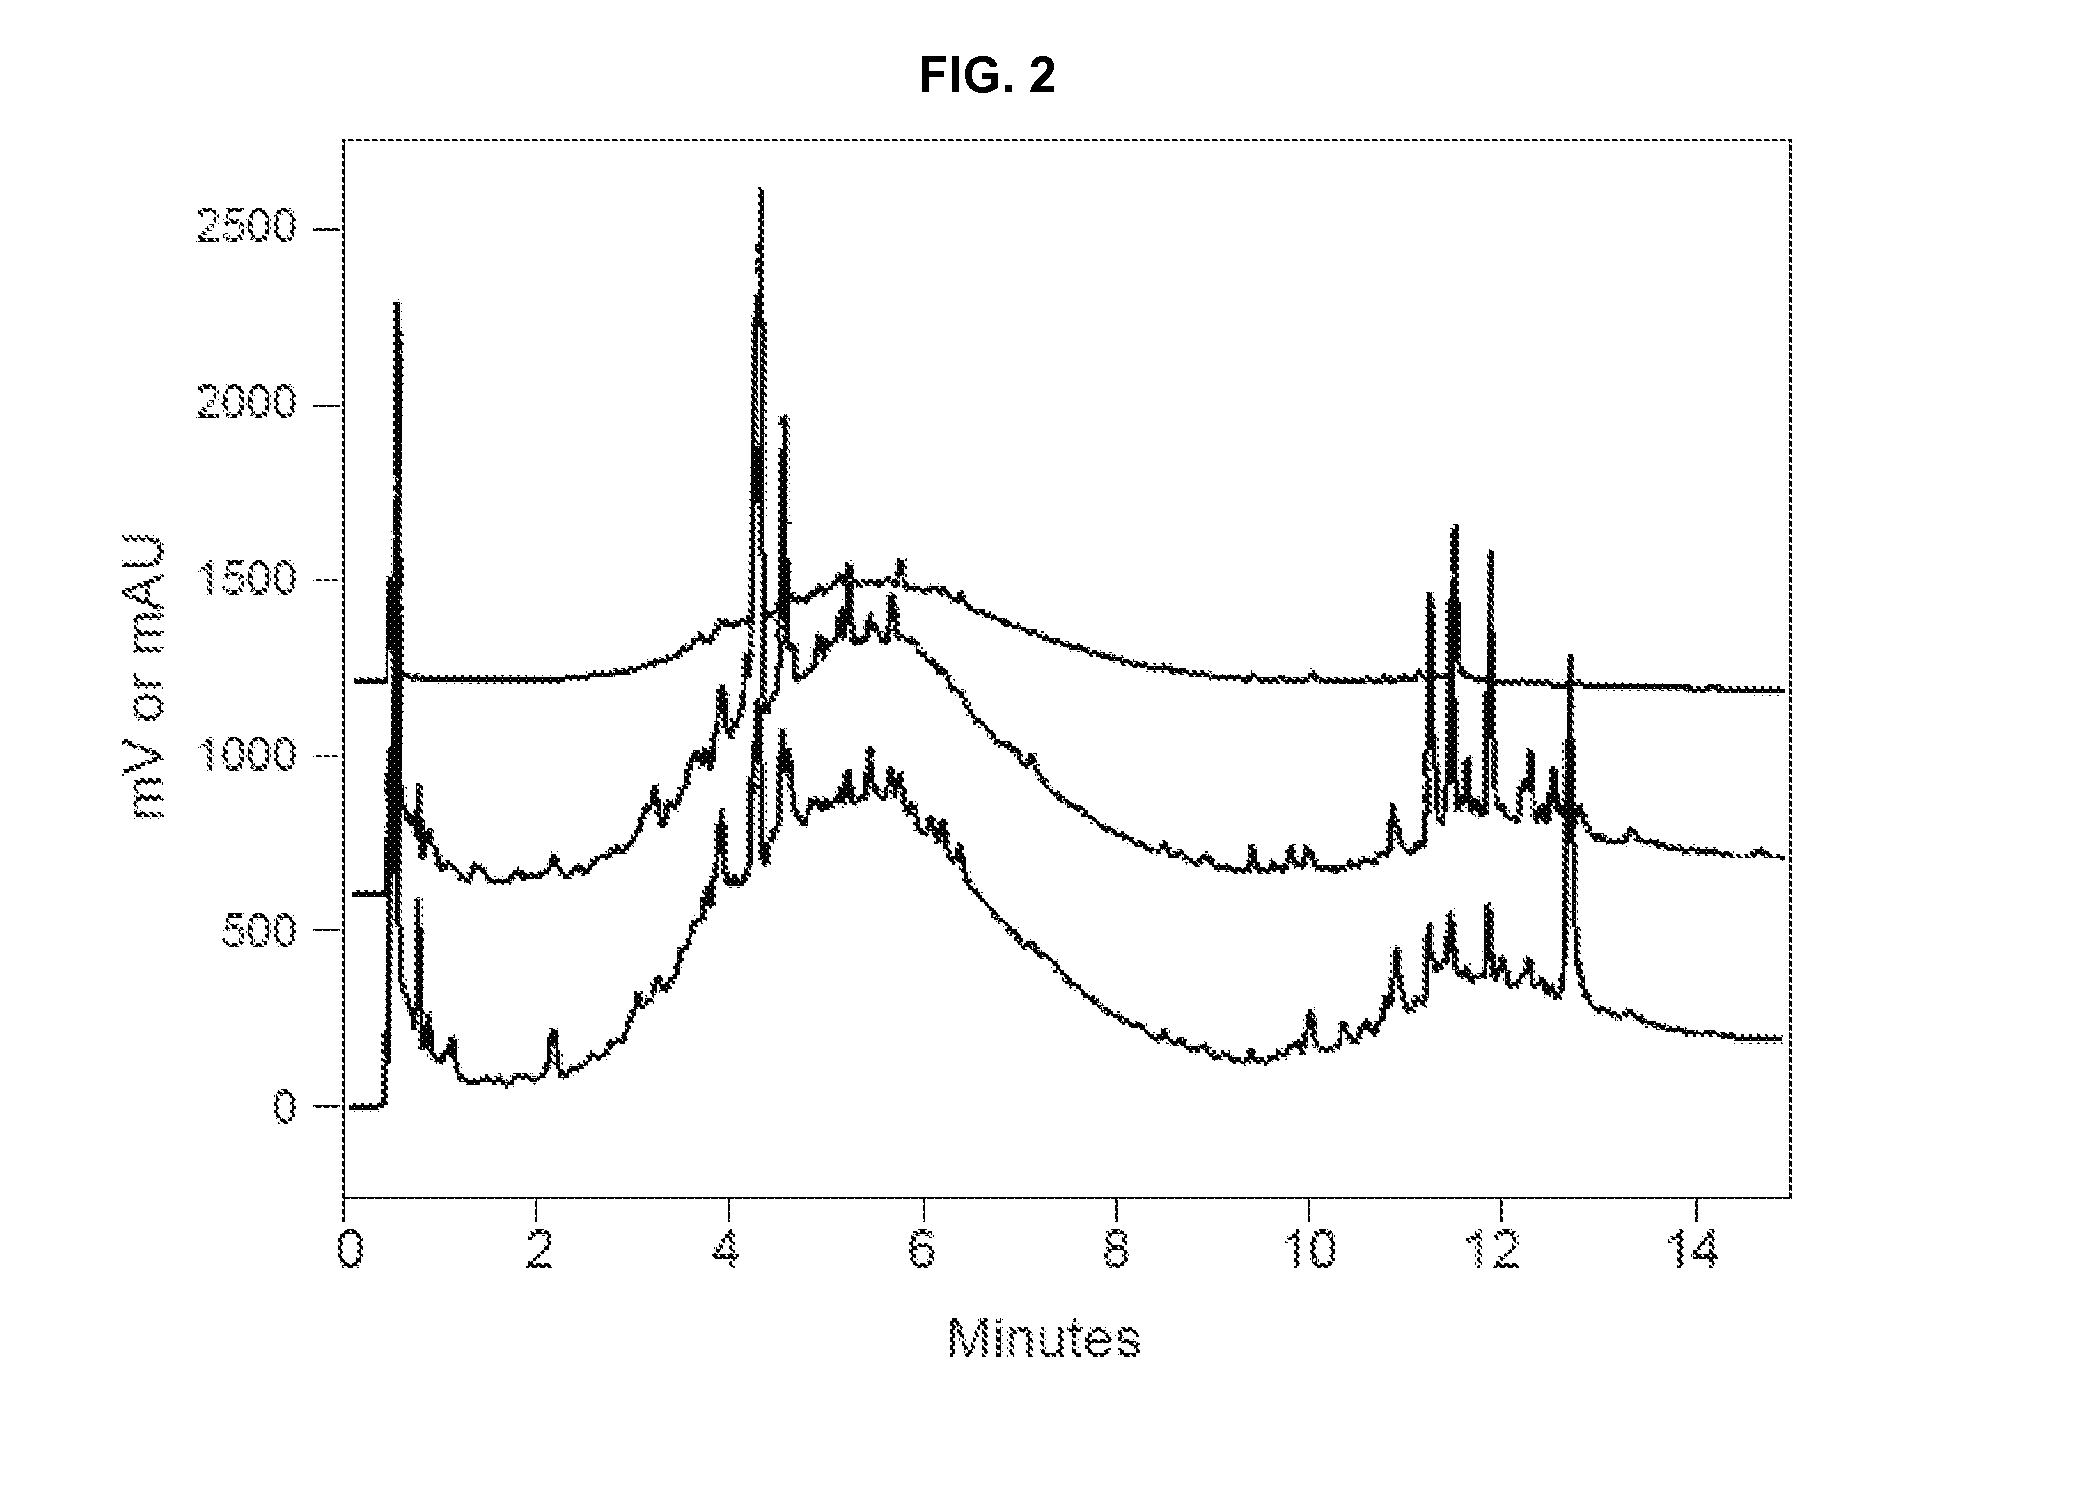 Use of Adipose Septa Protein Modulators and Compositions Thereof